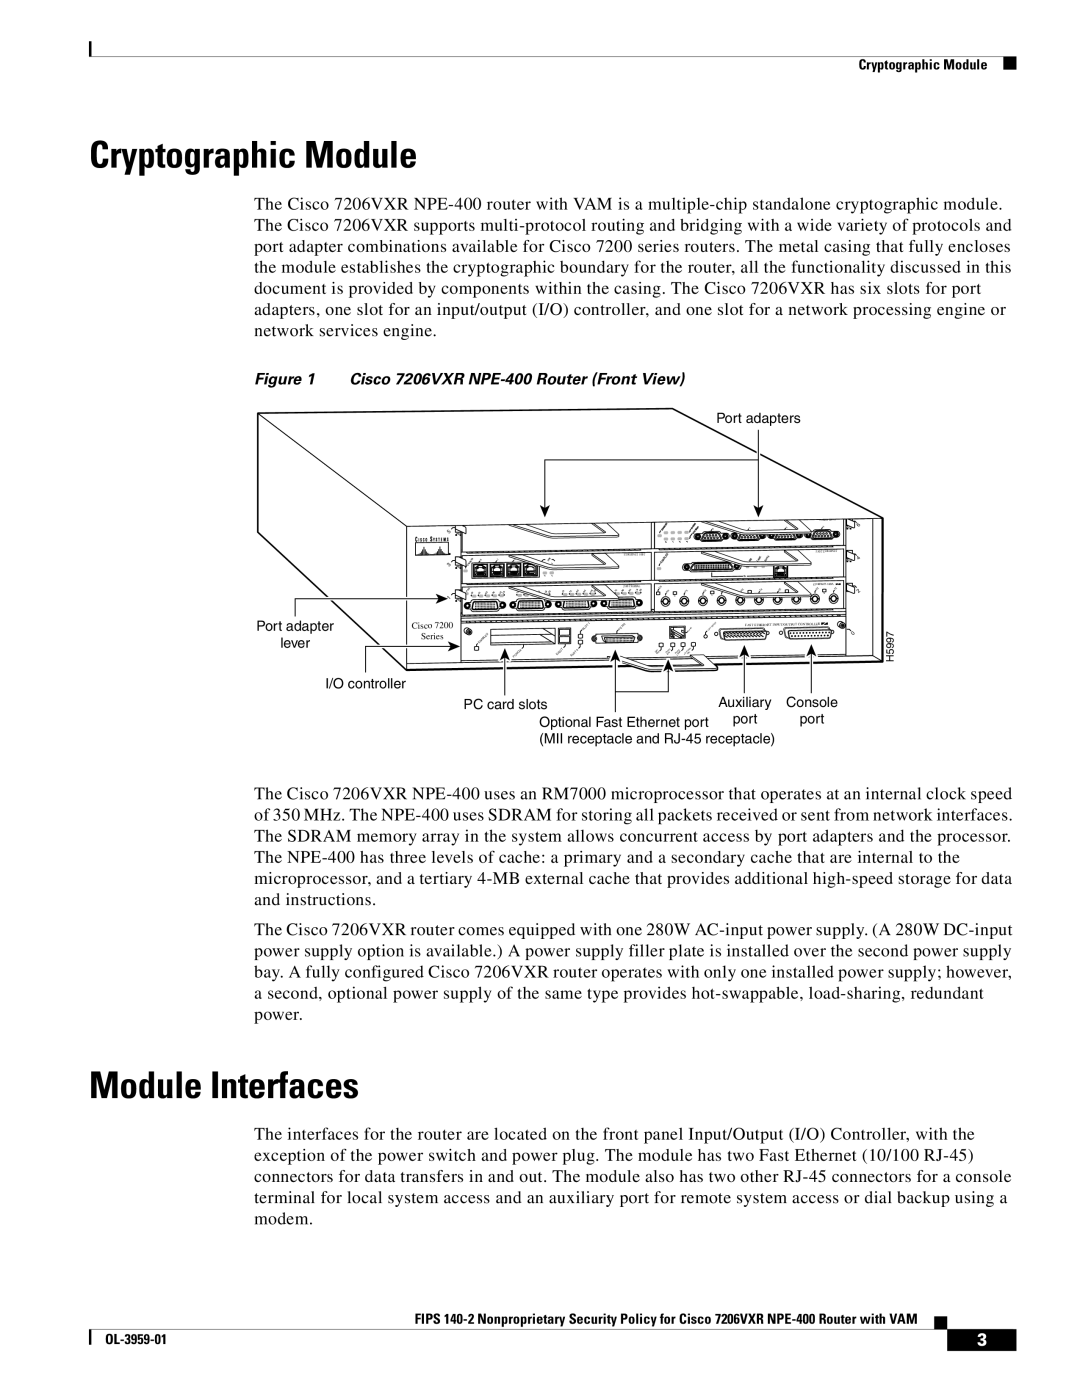 Cisco Systems manual Cryptographic Module, Module Interfaces, Cisco 7206VXR NPE-400 Router Front View 